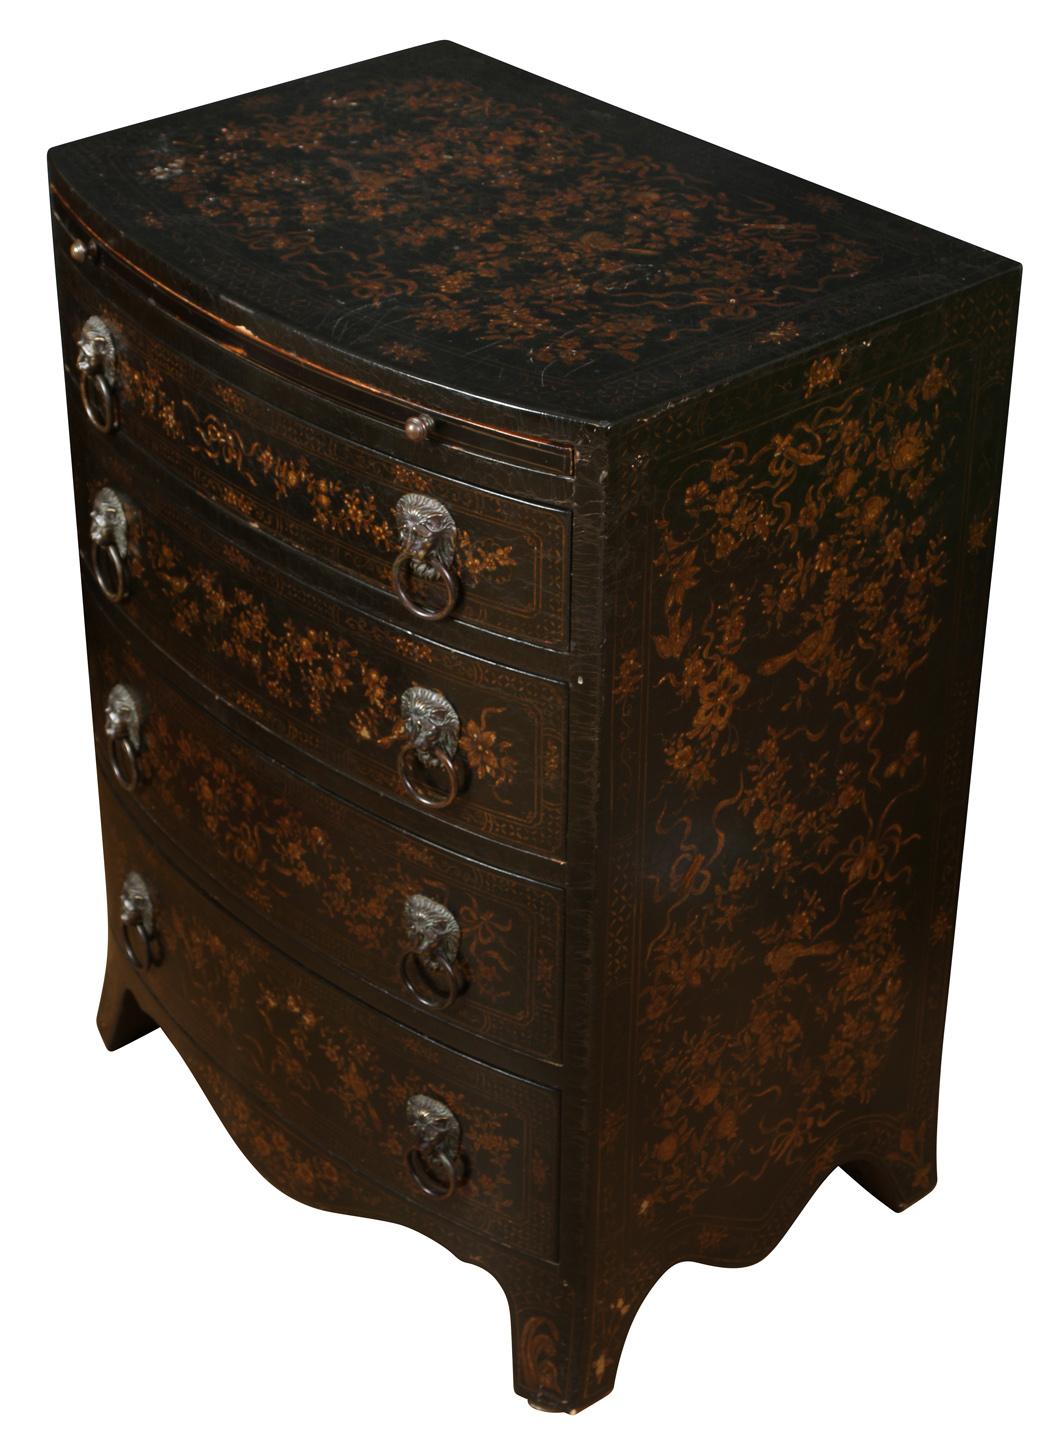 A great little size, this piece can be used as a side table, night table or in a small entry. Featuring four drawers with lion head pulls, the item has an ebonized finish decorated in a gold floral motif. The scalloped apron and pull-out tray add